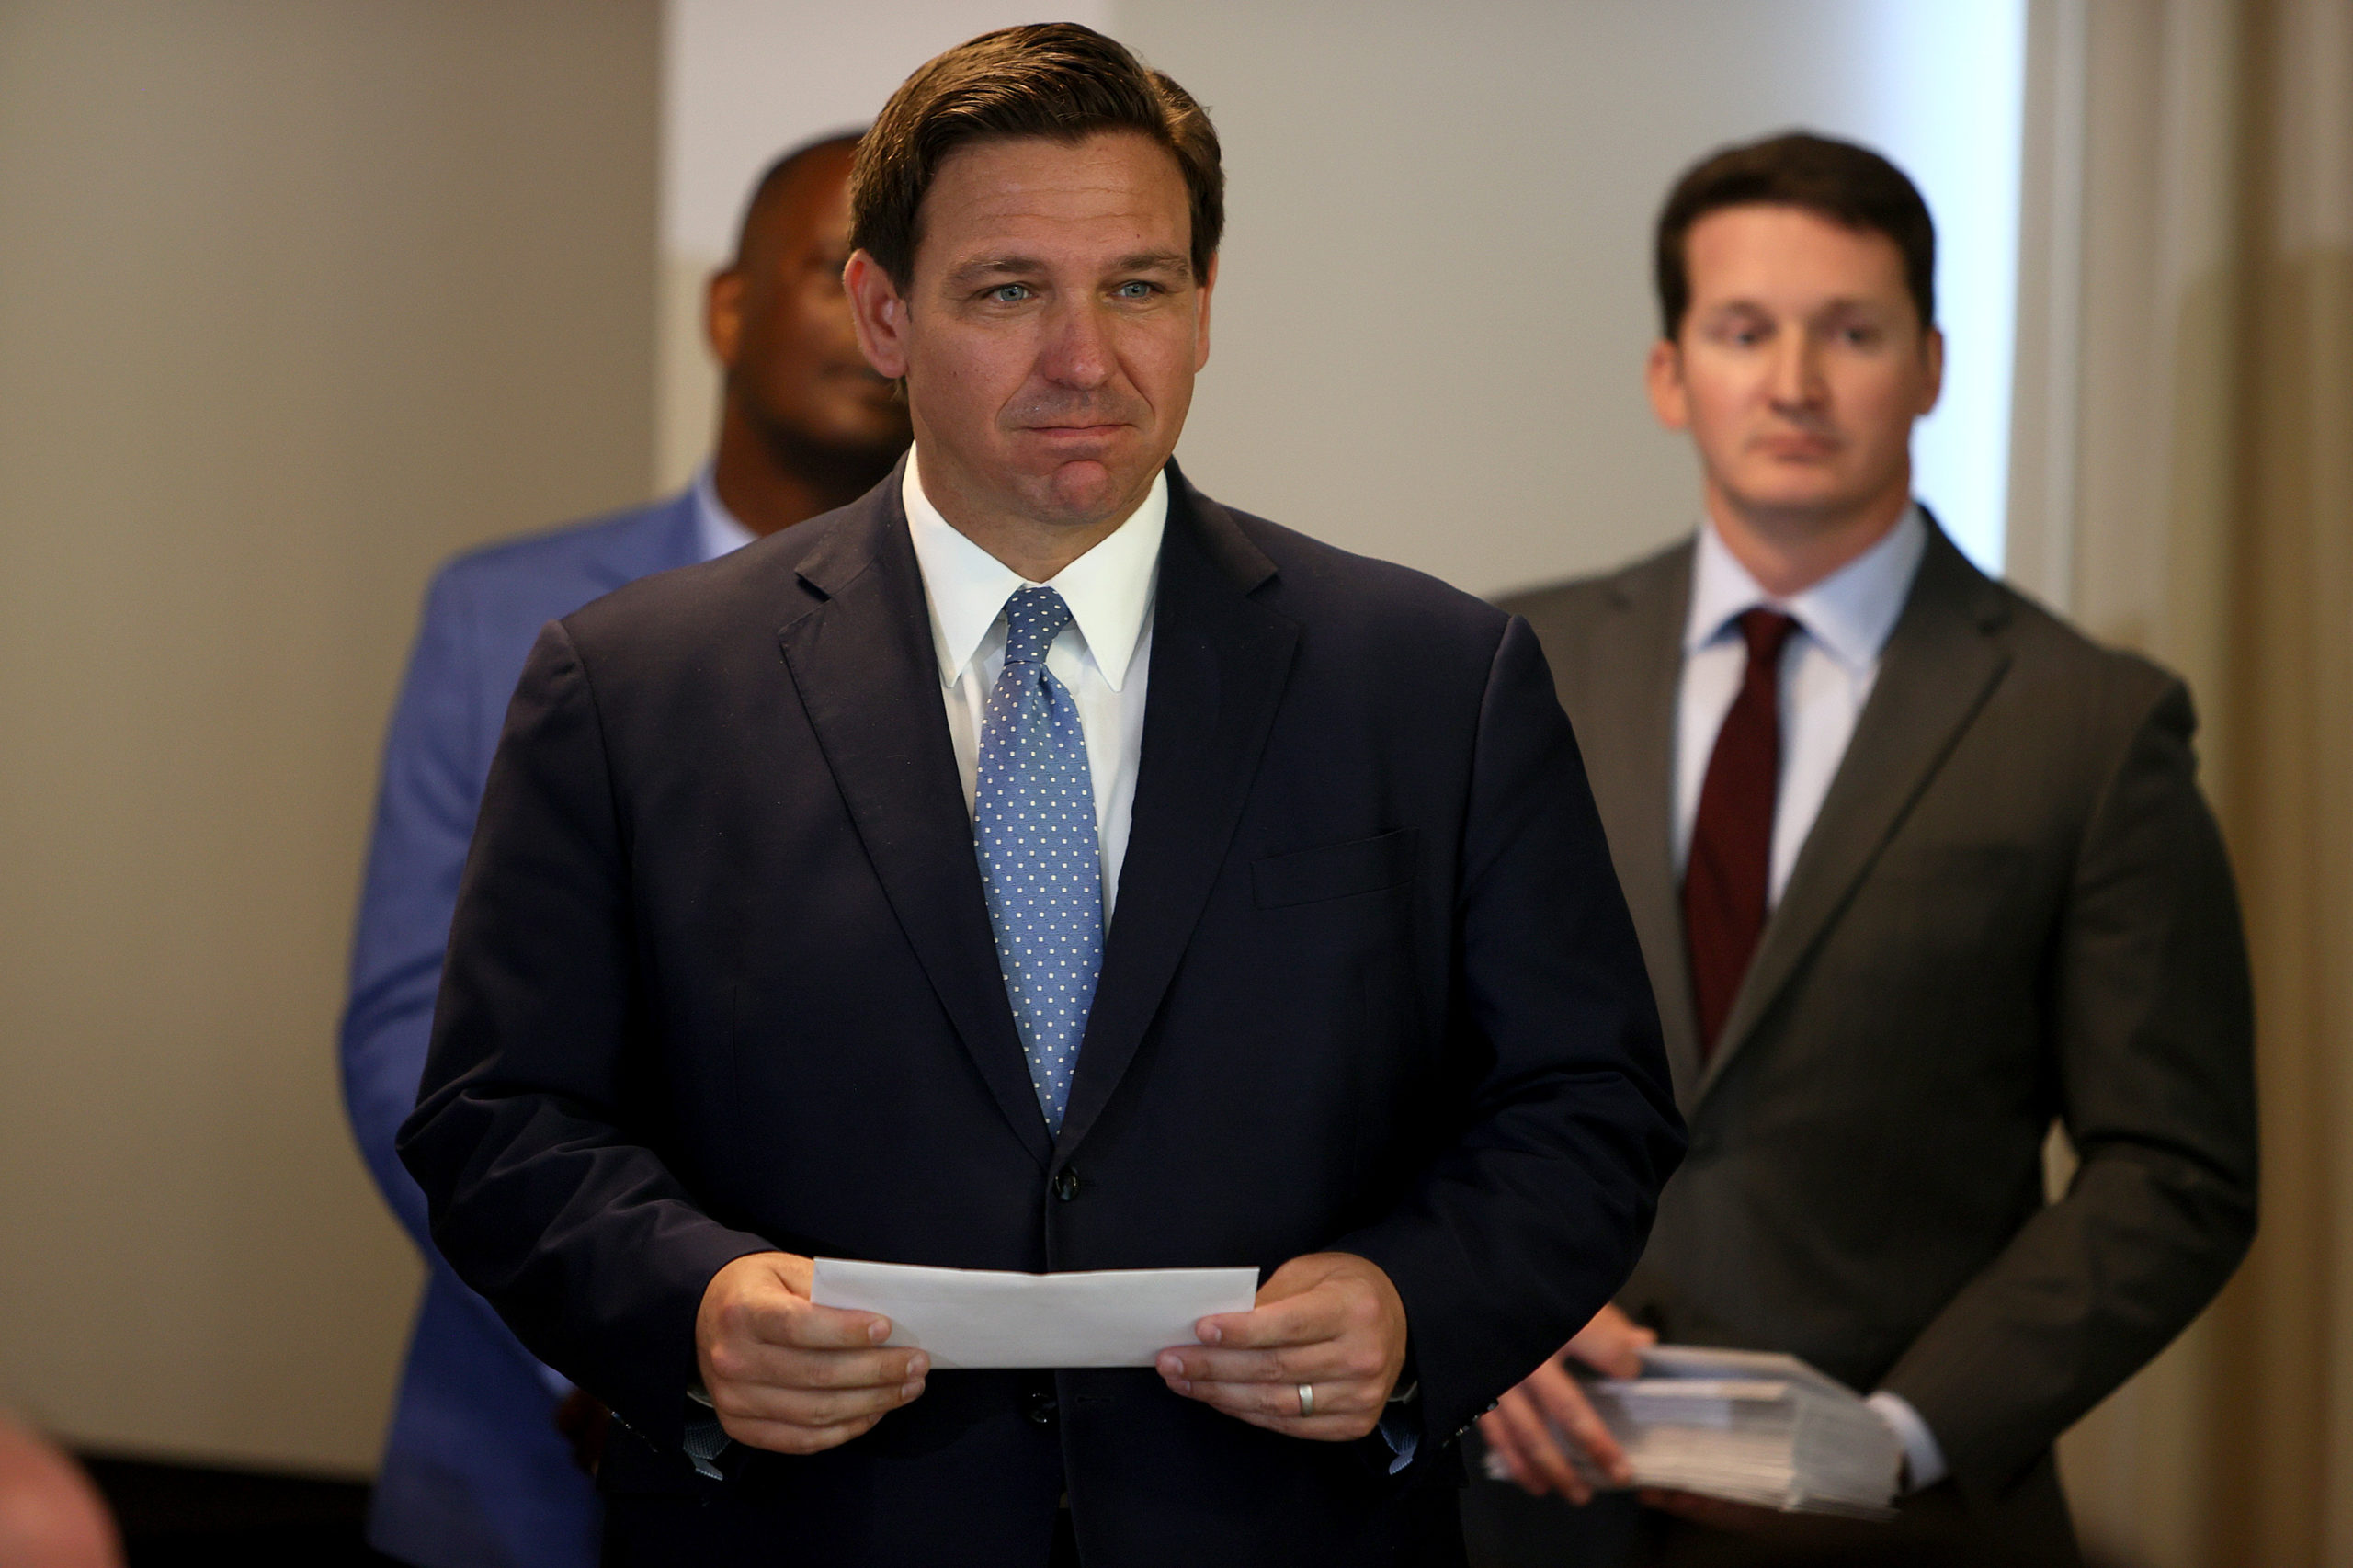 Florida Gov. Ron DeSantis waits to present a check to a first responder during an event to give out bonuses to them held at the Grand Beach Hotel Surfside on August 10, 2021 in Surfside, Florida. (Photo by Joe Raedle/Getty Images)